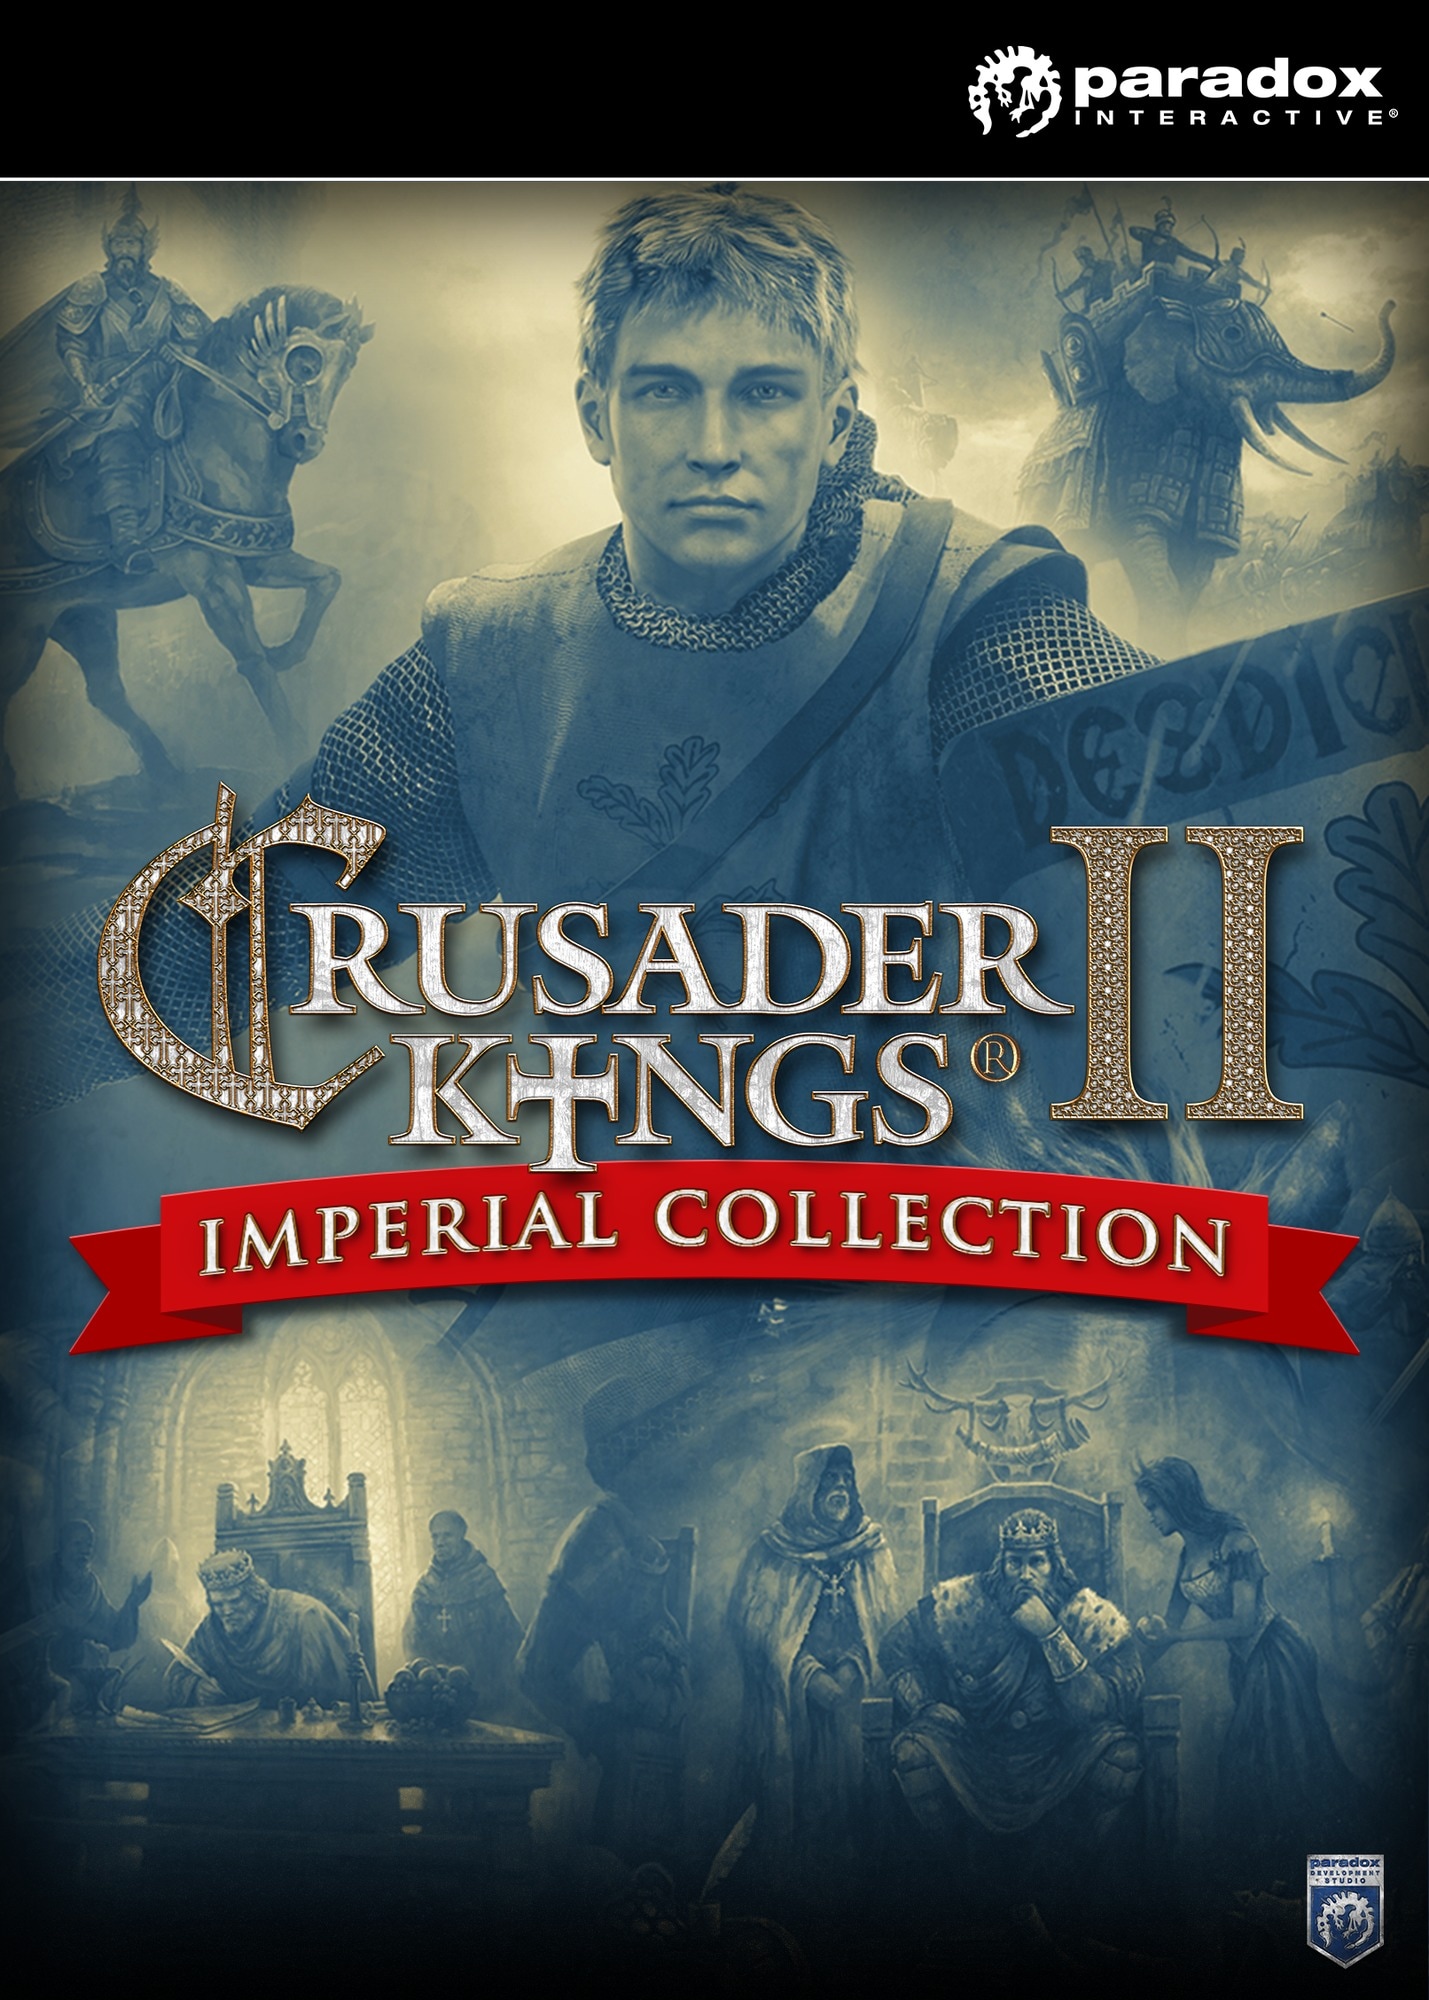 Crusader Kings II: Imperial Collection - PC Windows,Mac OSX,Linux